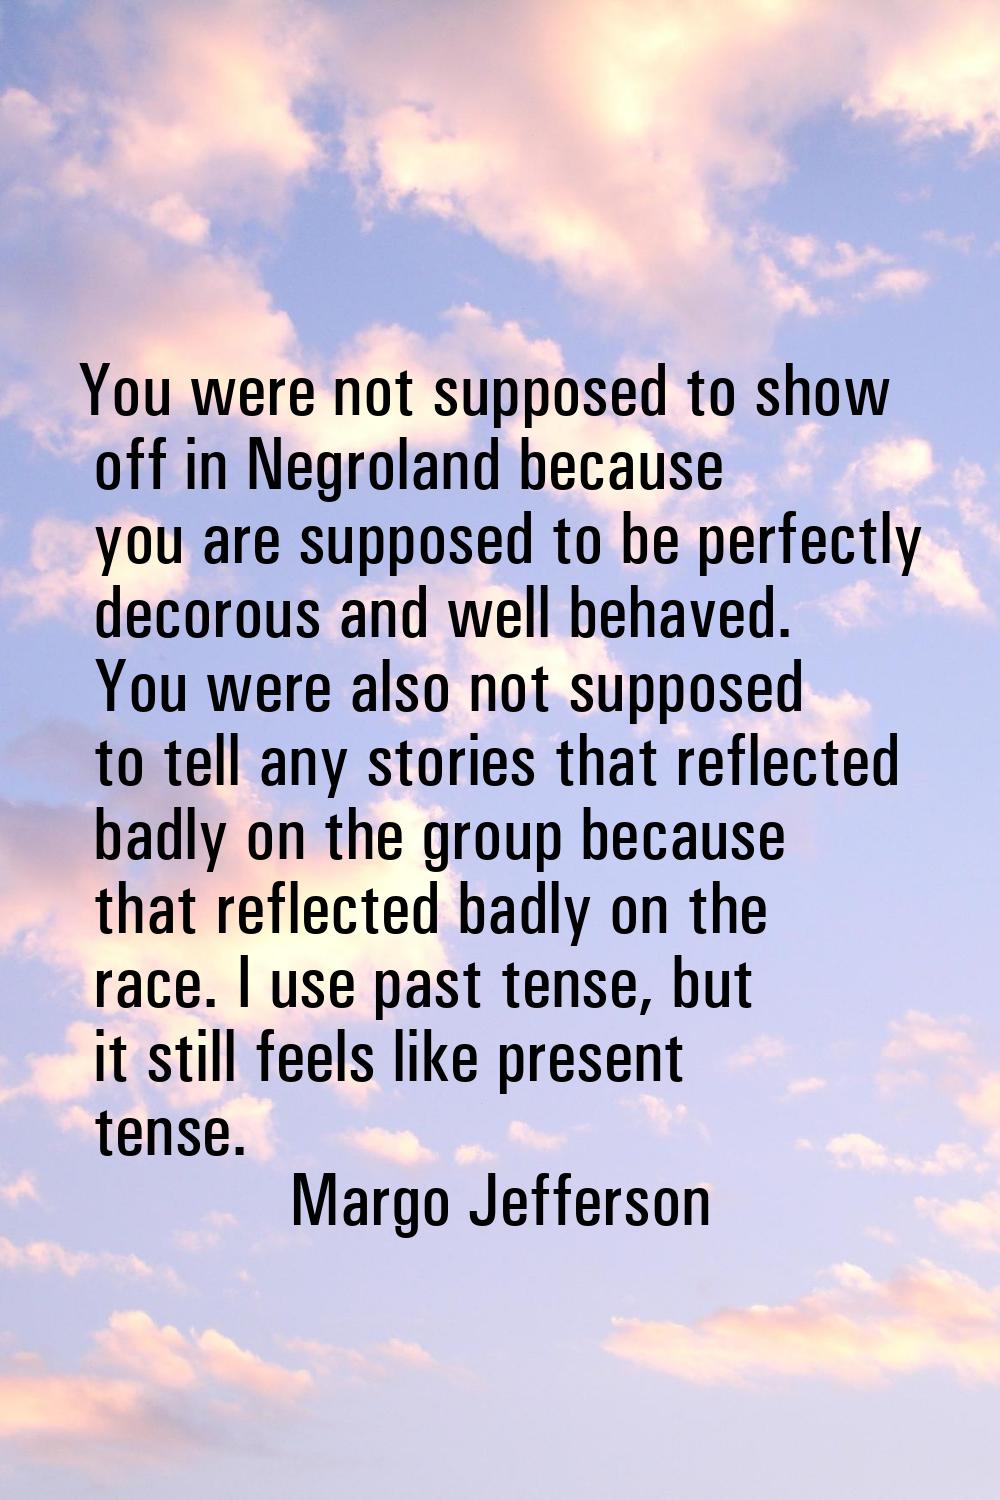 You were not supposed to show off in Negroland because you are supposed to be perfectly decorous an